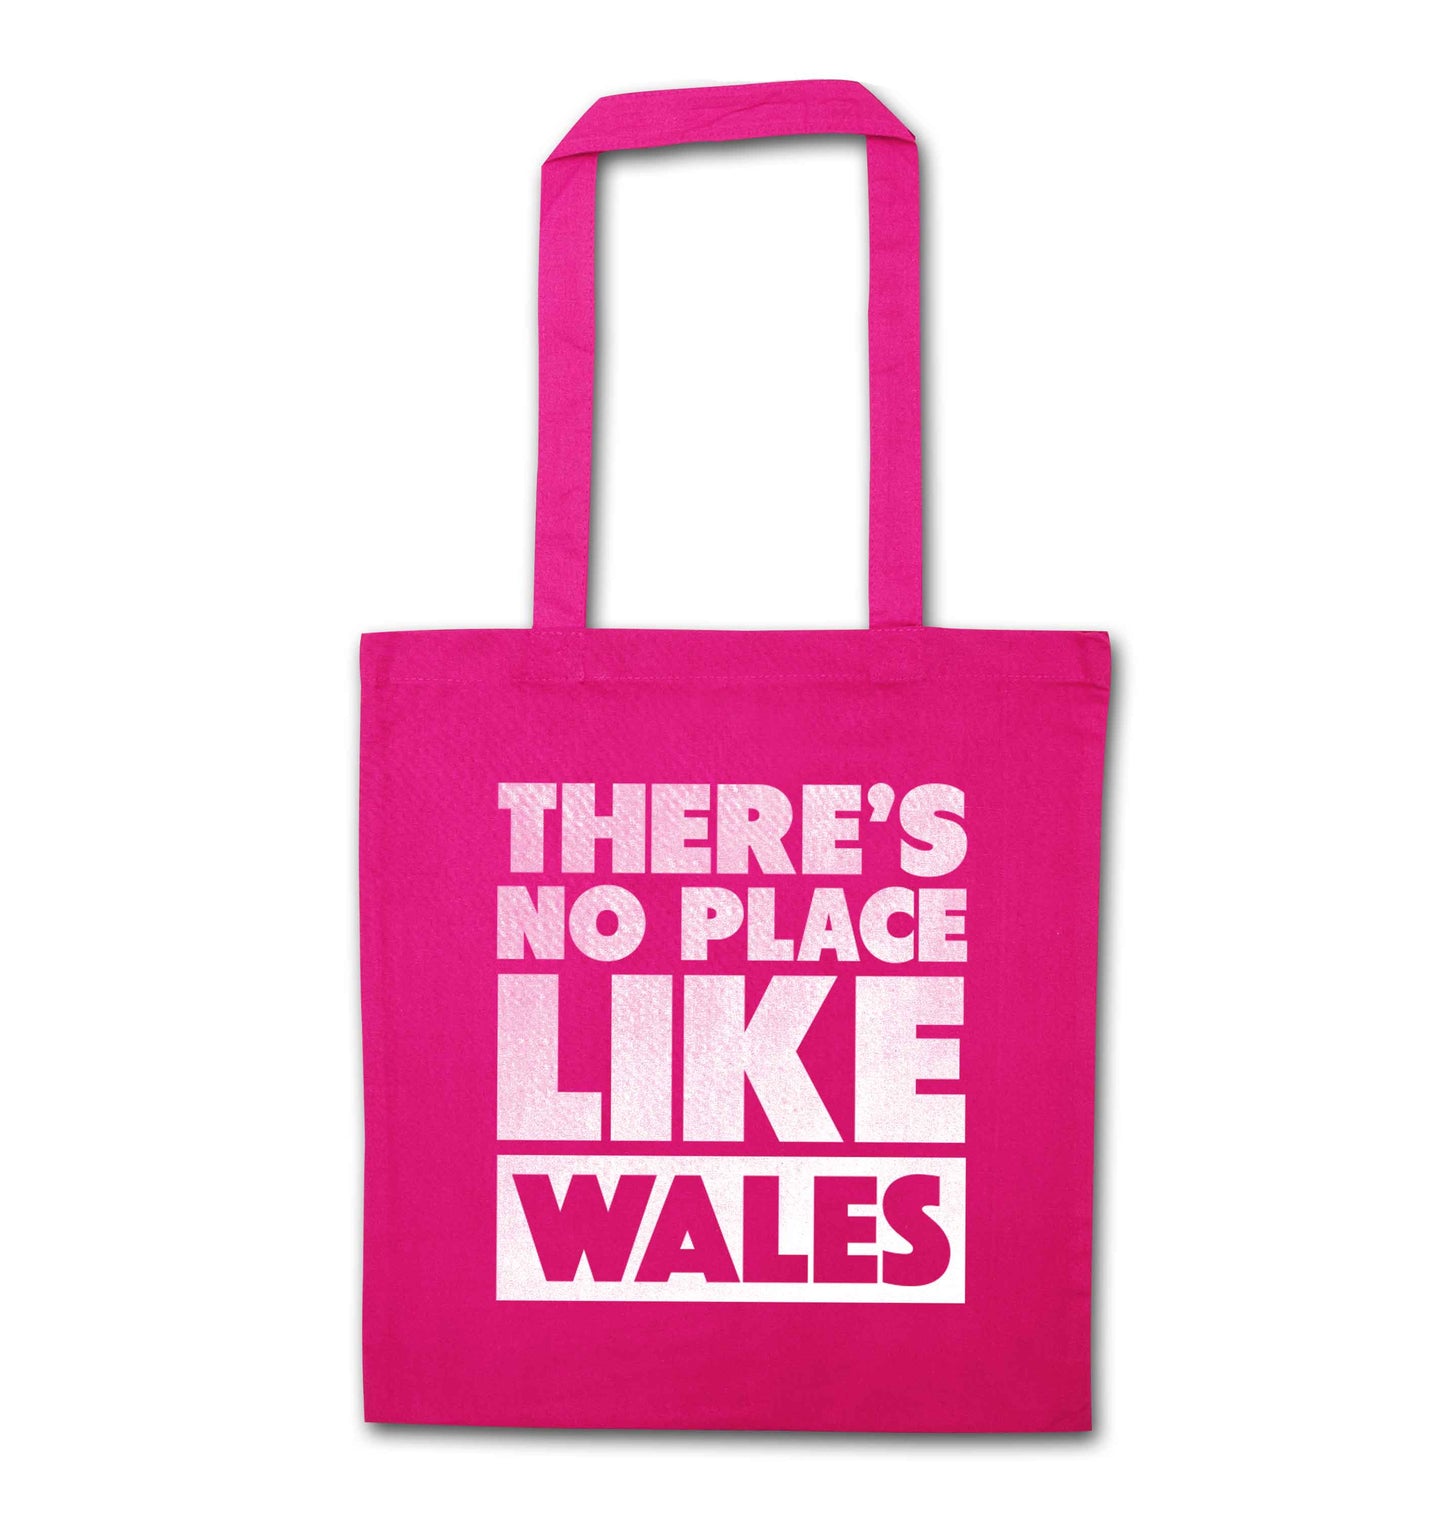 There's no place like Wales pink tote bag